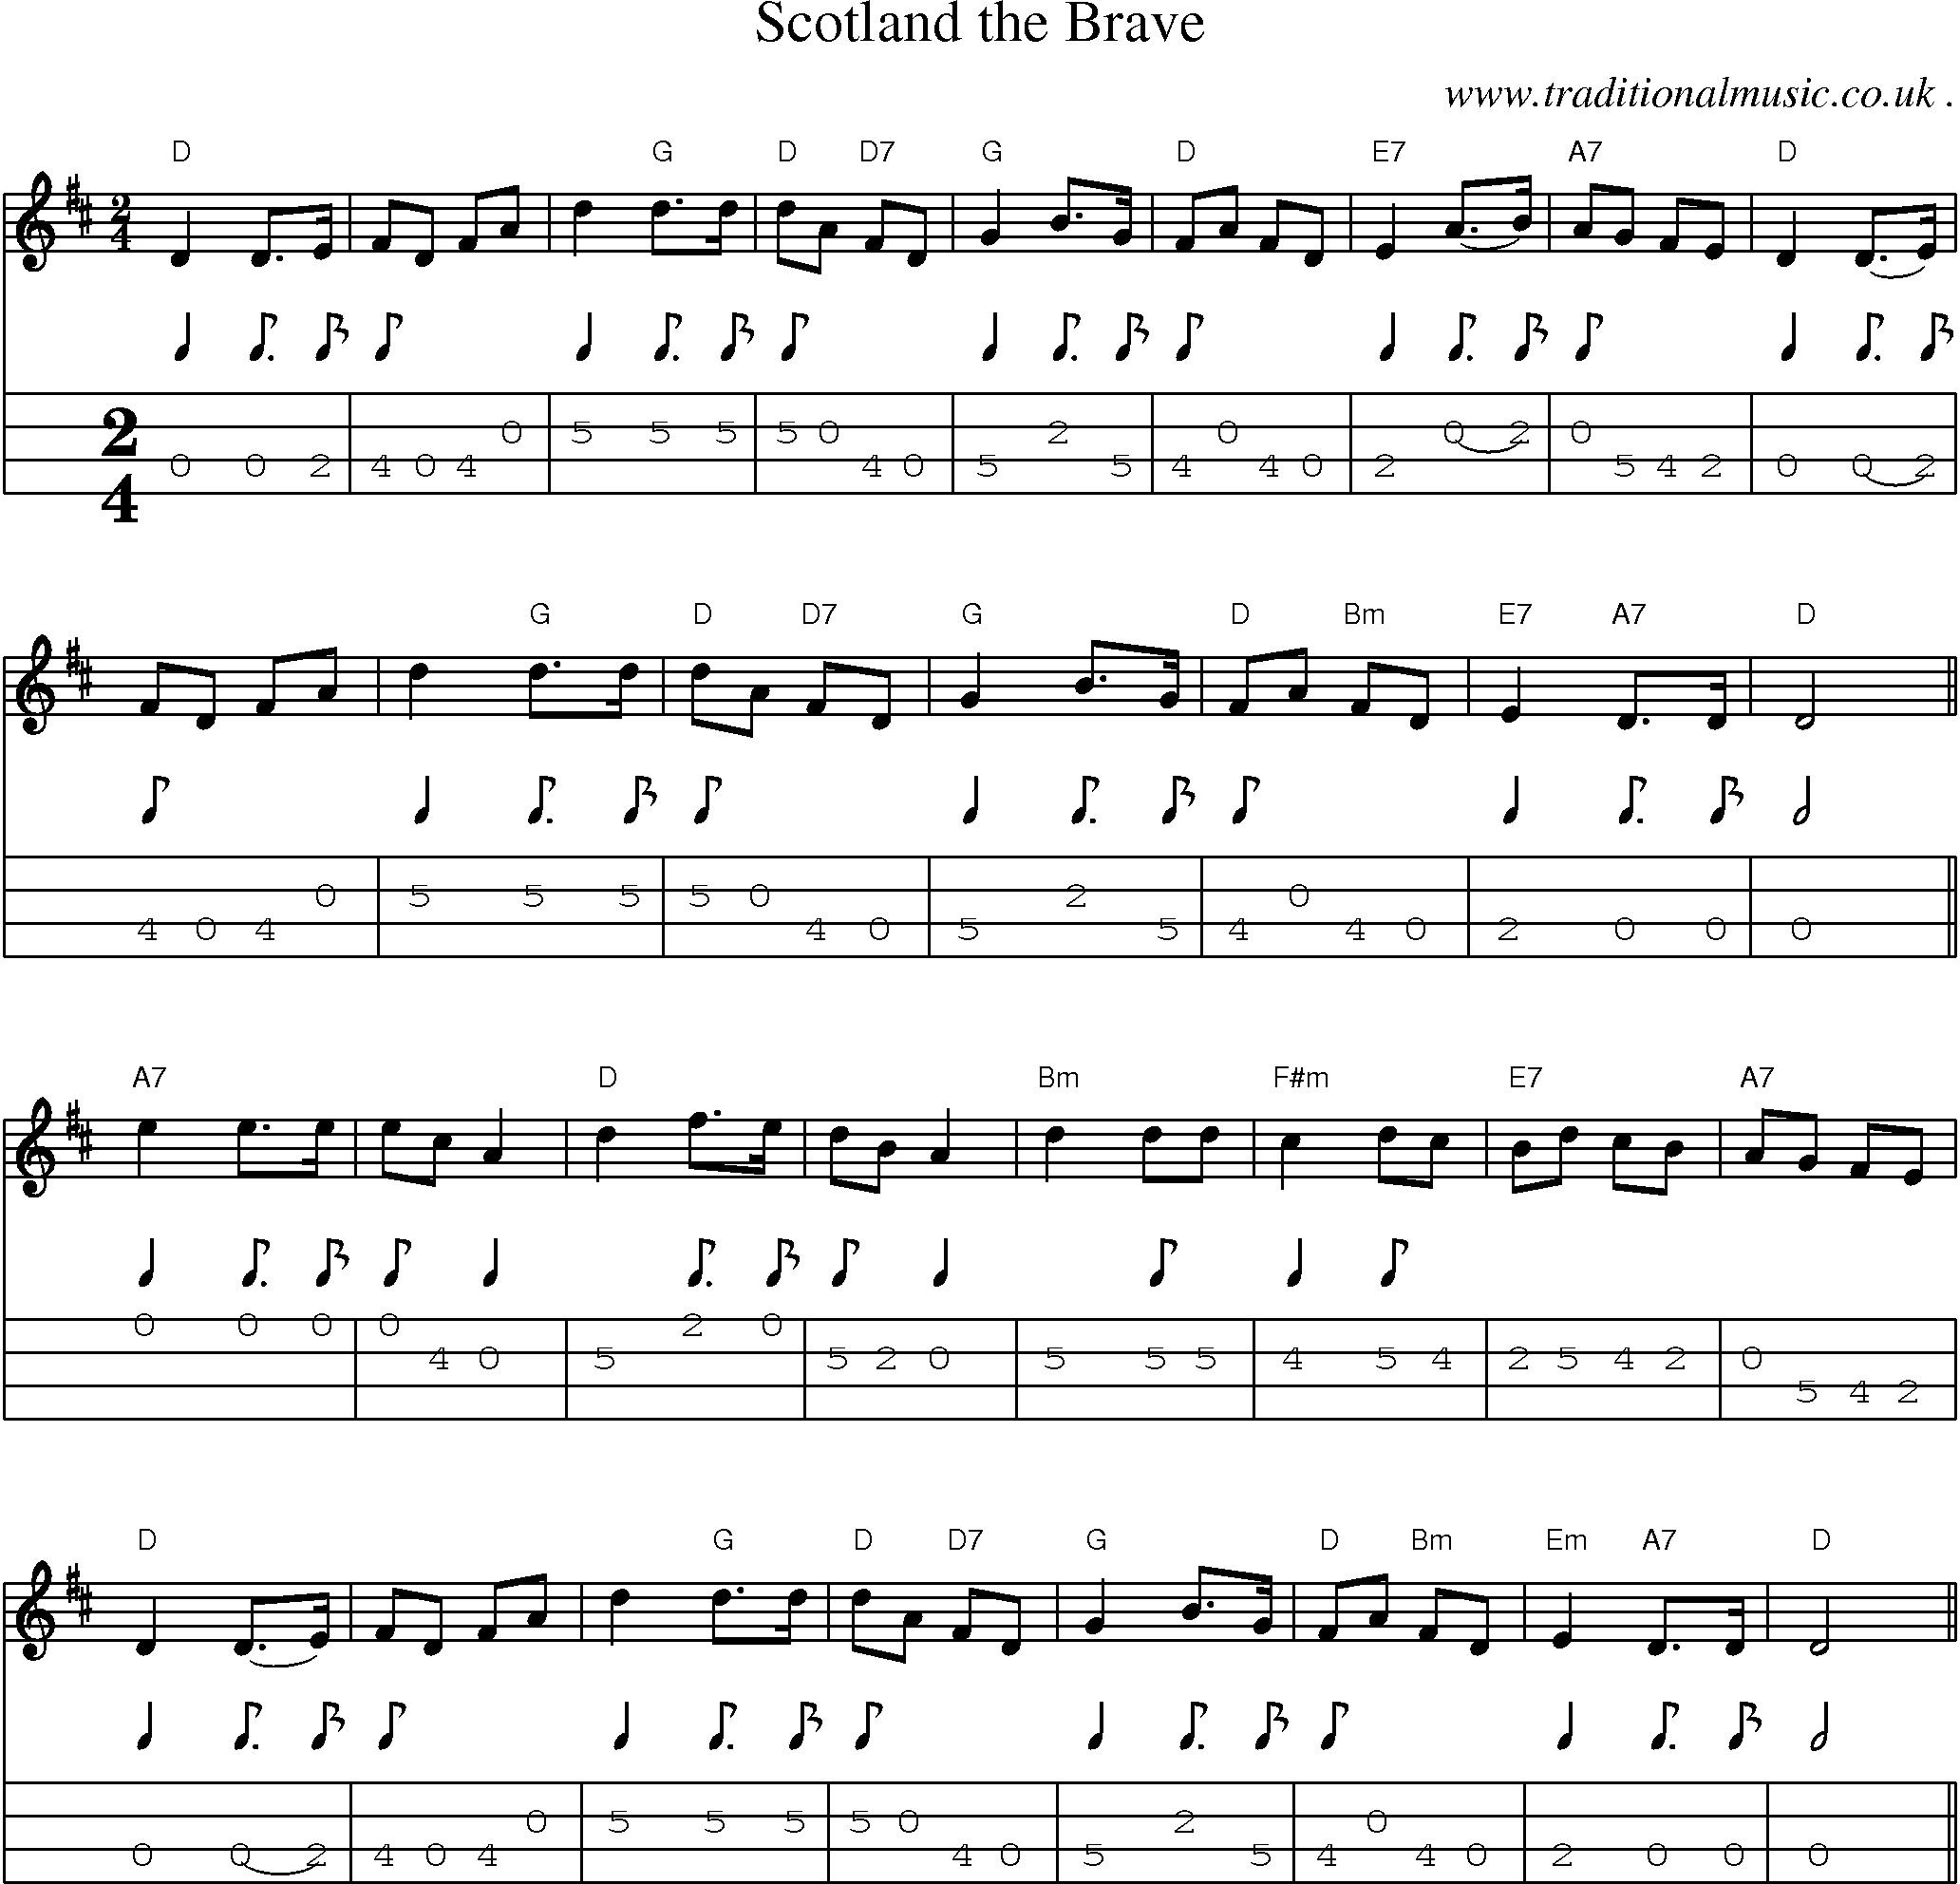 Music Score and Mandolin Tabs for Scotland The Brave